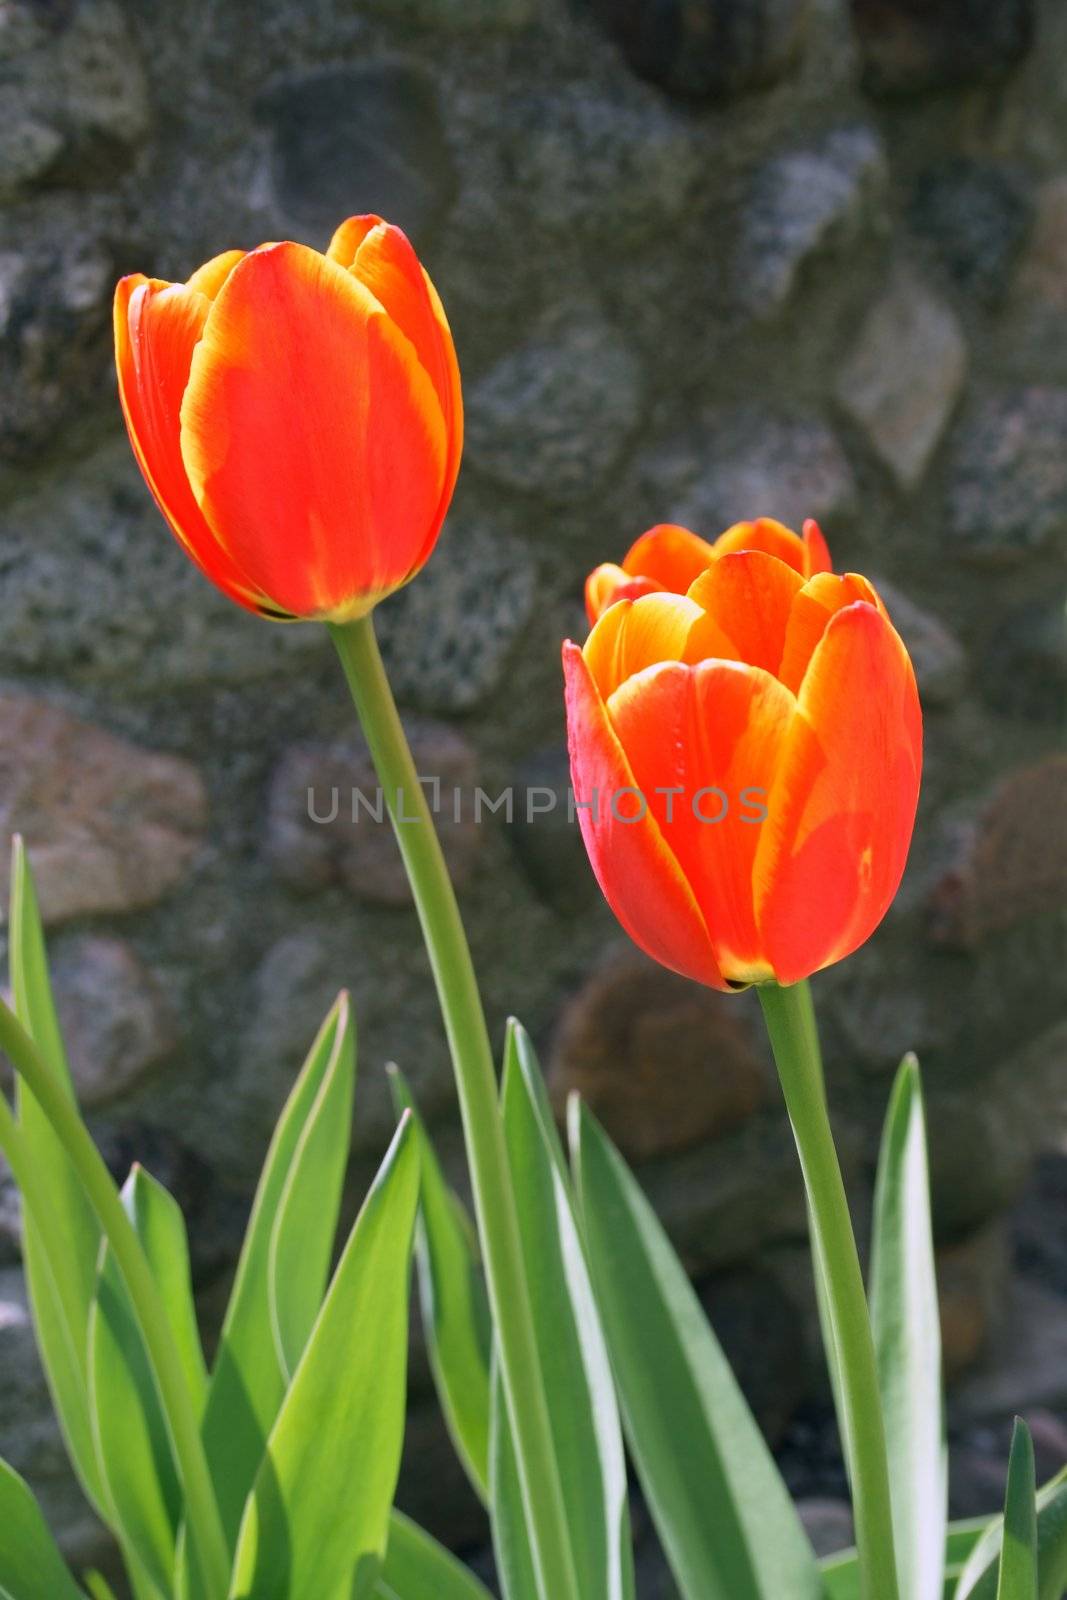 Two red tulips shining under the sun.